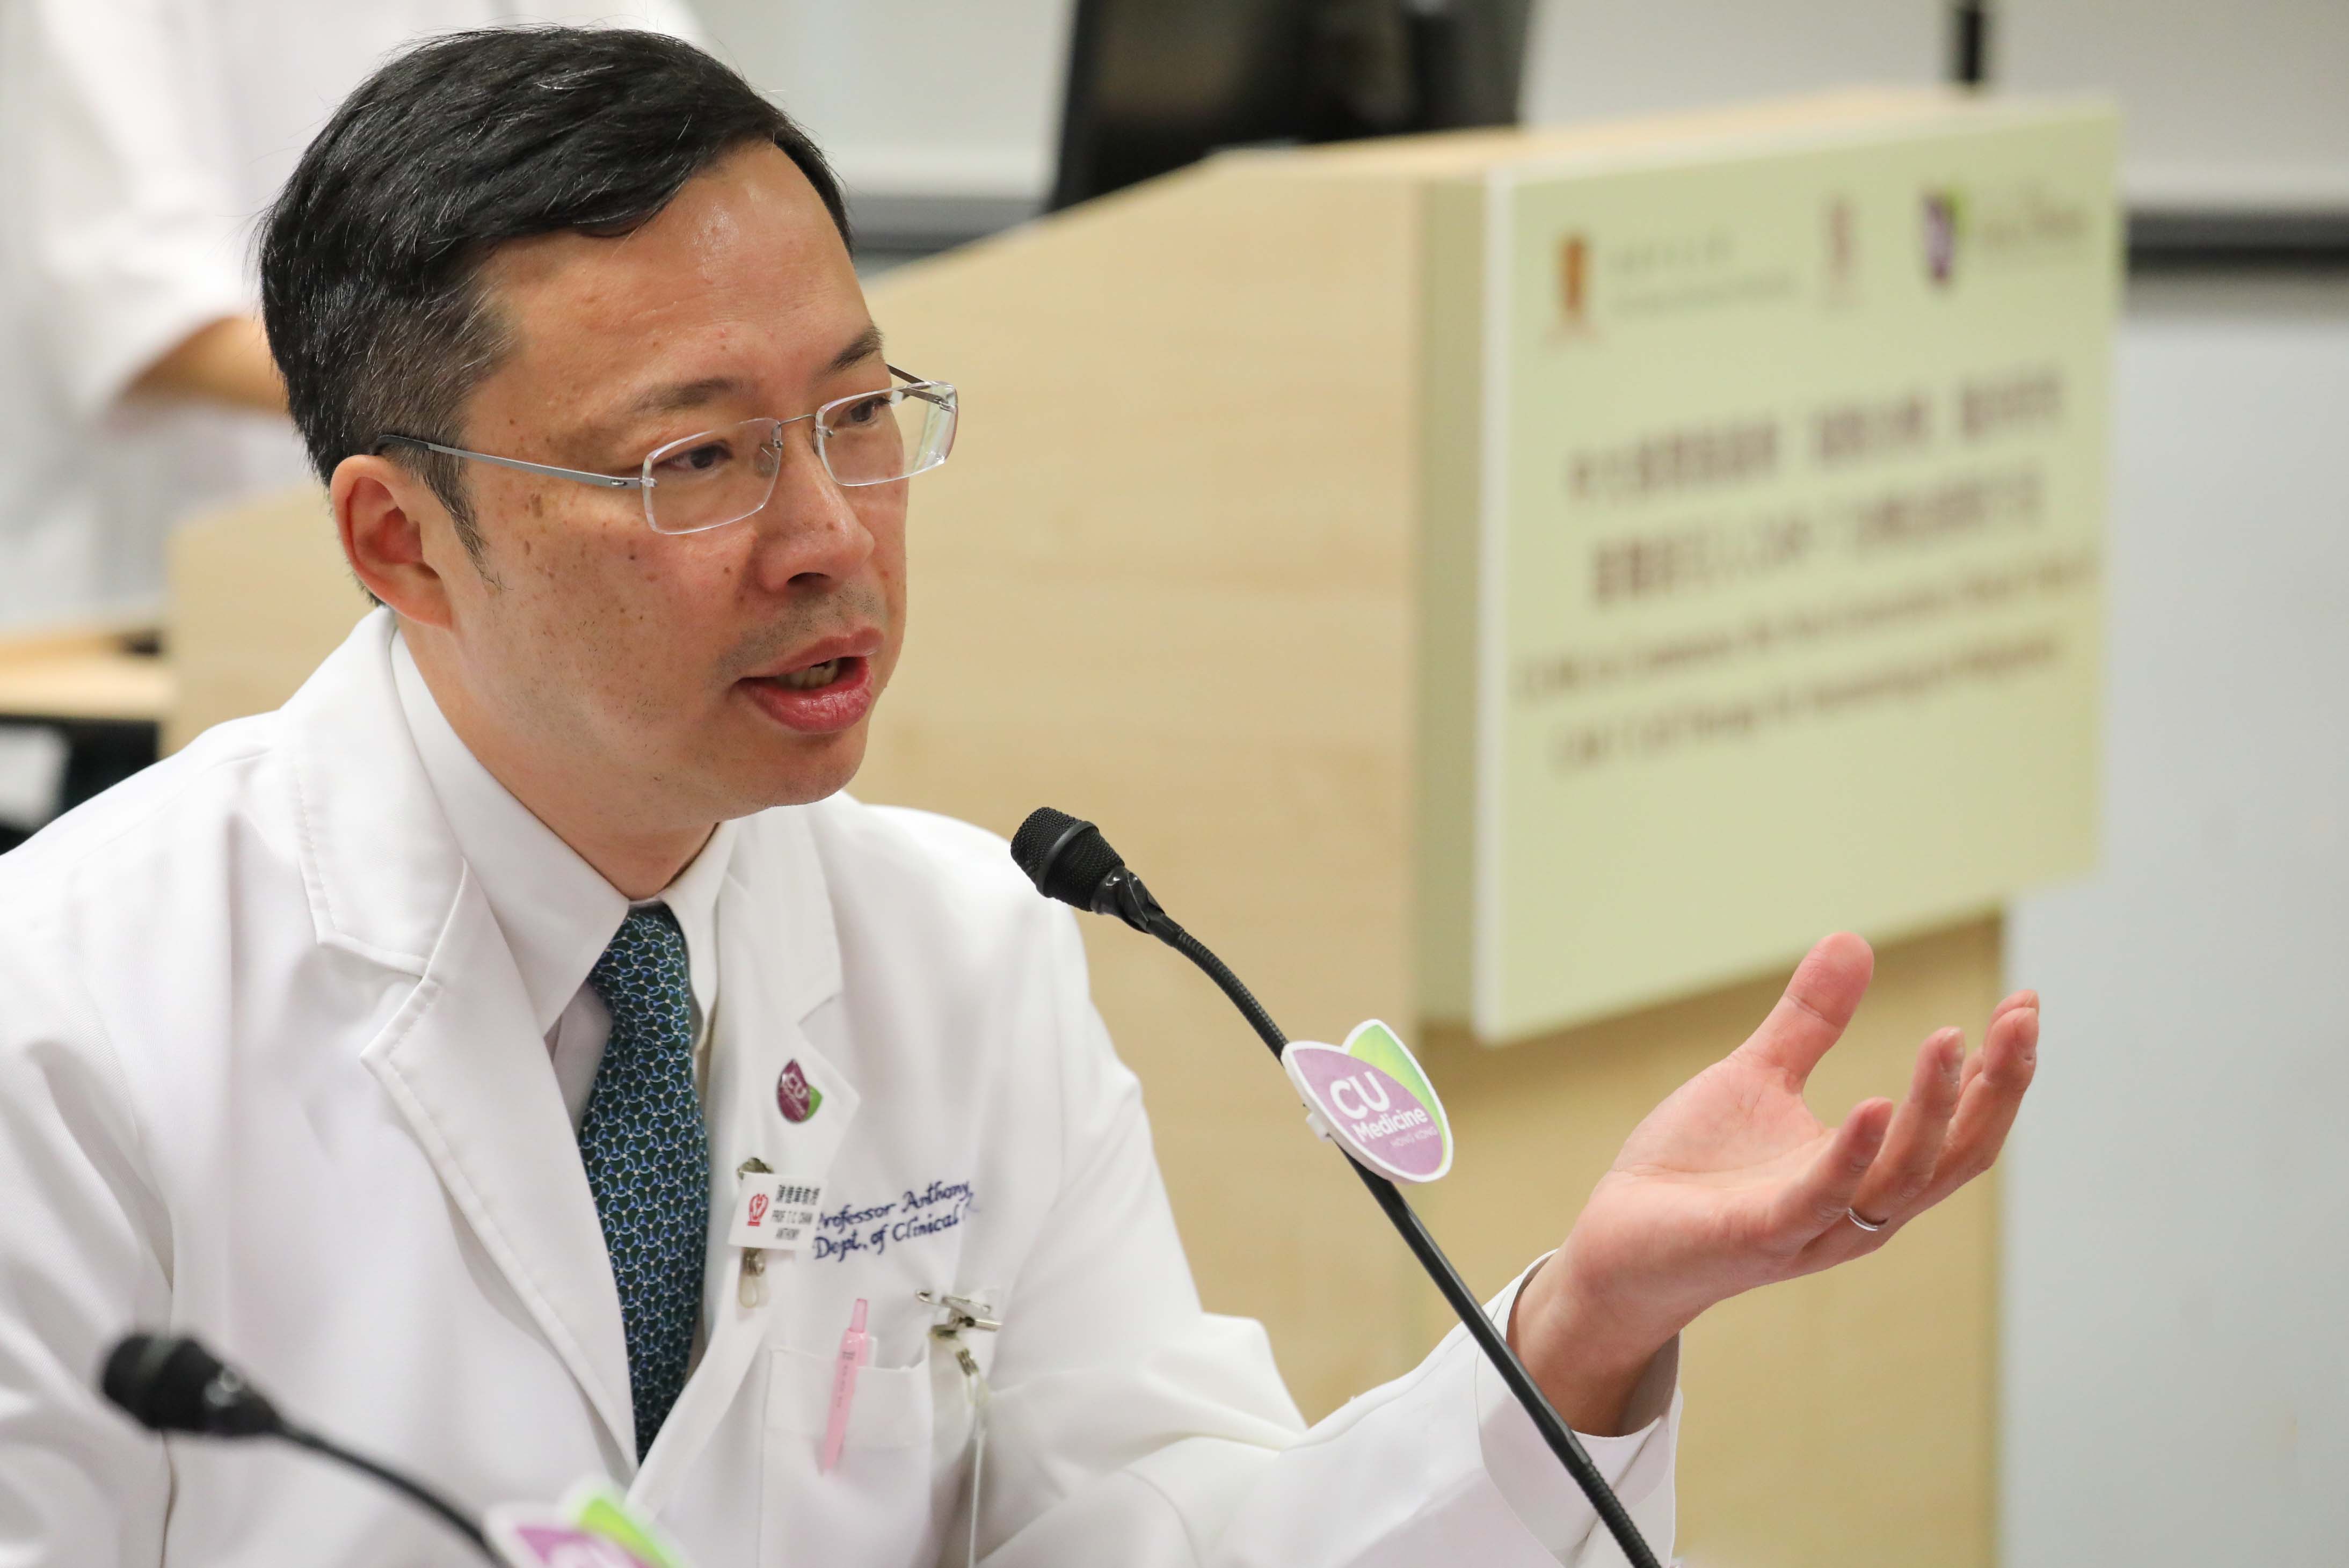 Professor Anthony CHAN, Li Shu Fan Professor of Clinical Oncology, Faculty of Medicine at CUHK, hopes that the CAR-T cell therapy can further cover patients with other cancer types in the future.